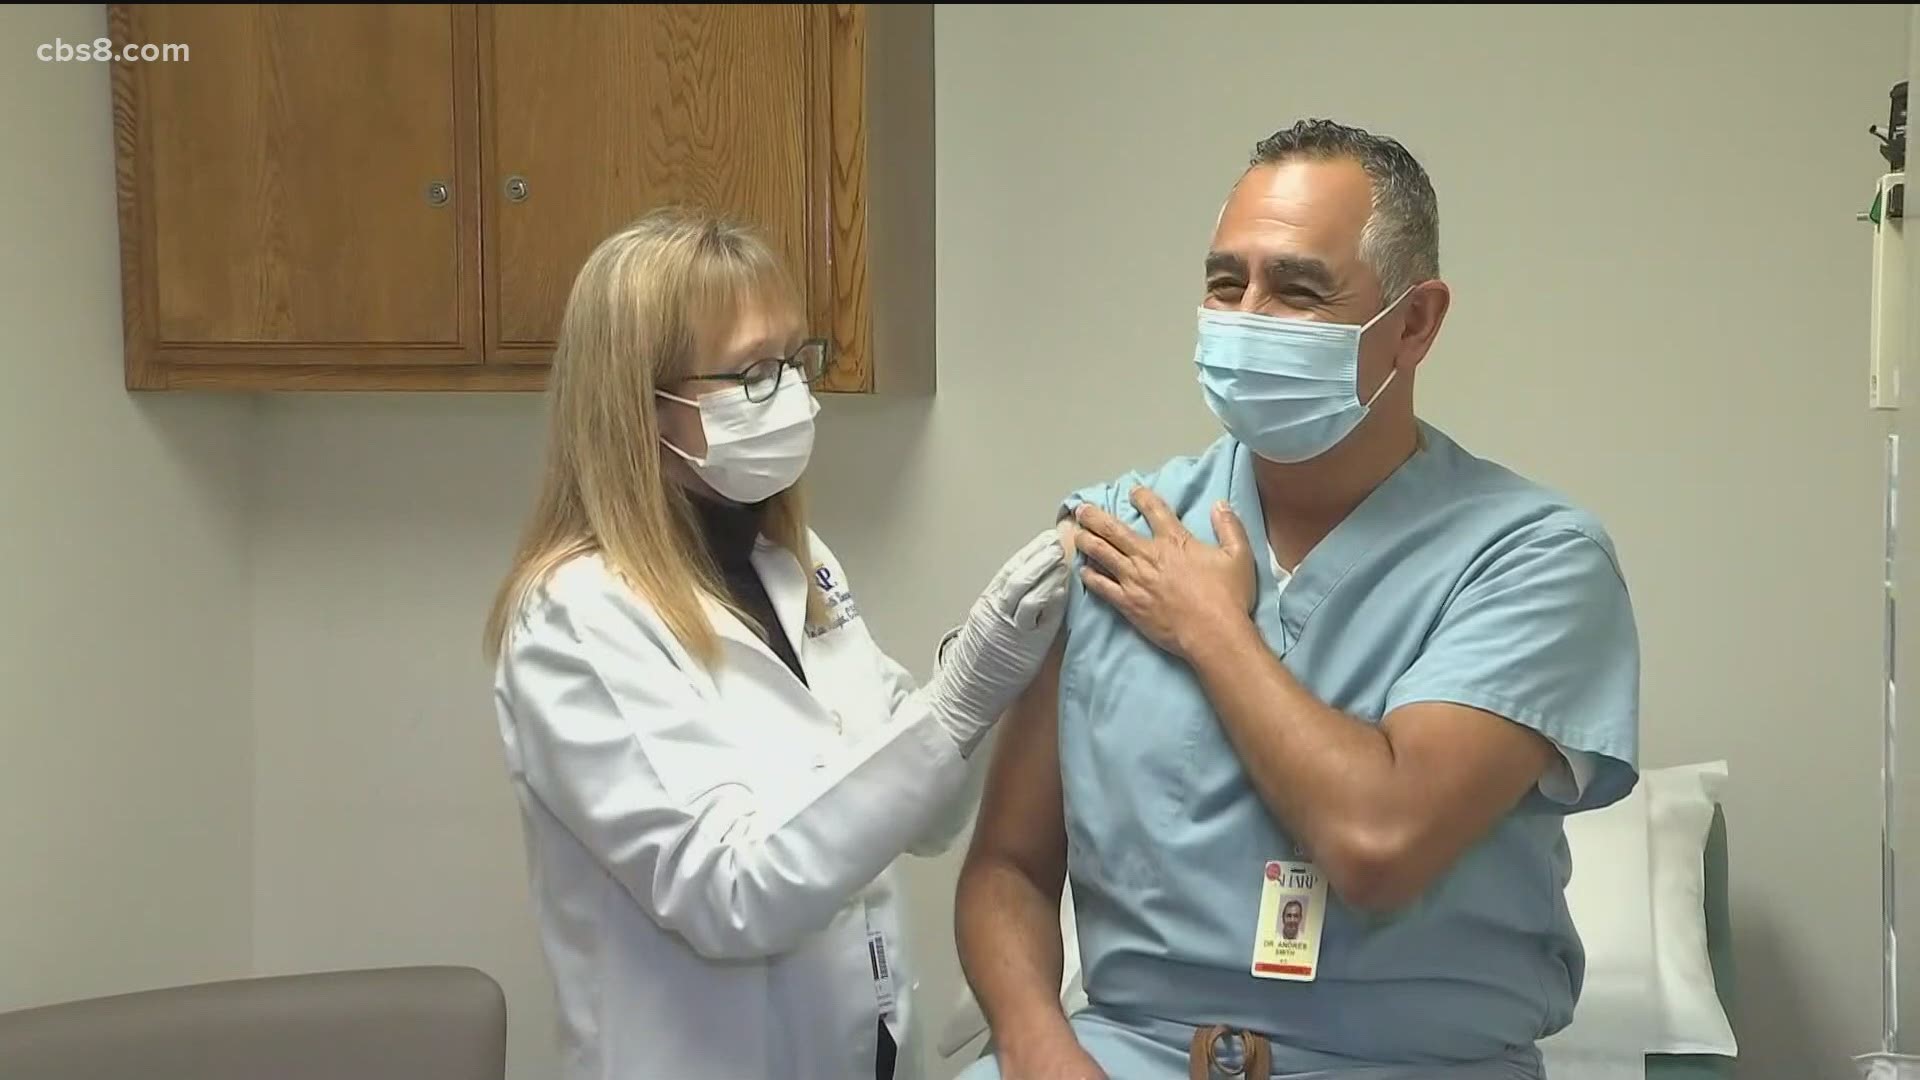 He's one of the first Mexican doctors in San Diego County to receive the vaccine.